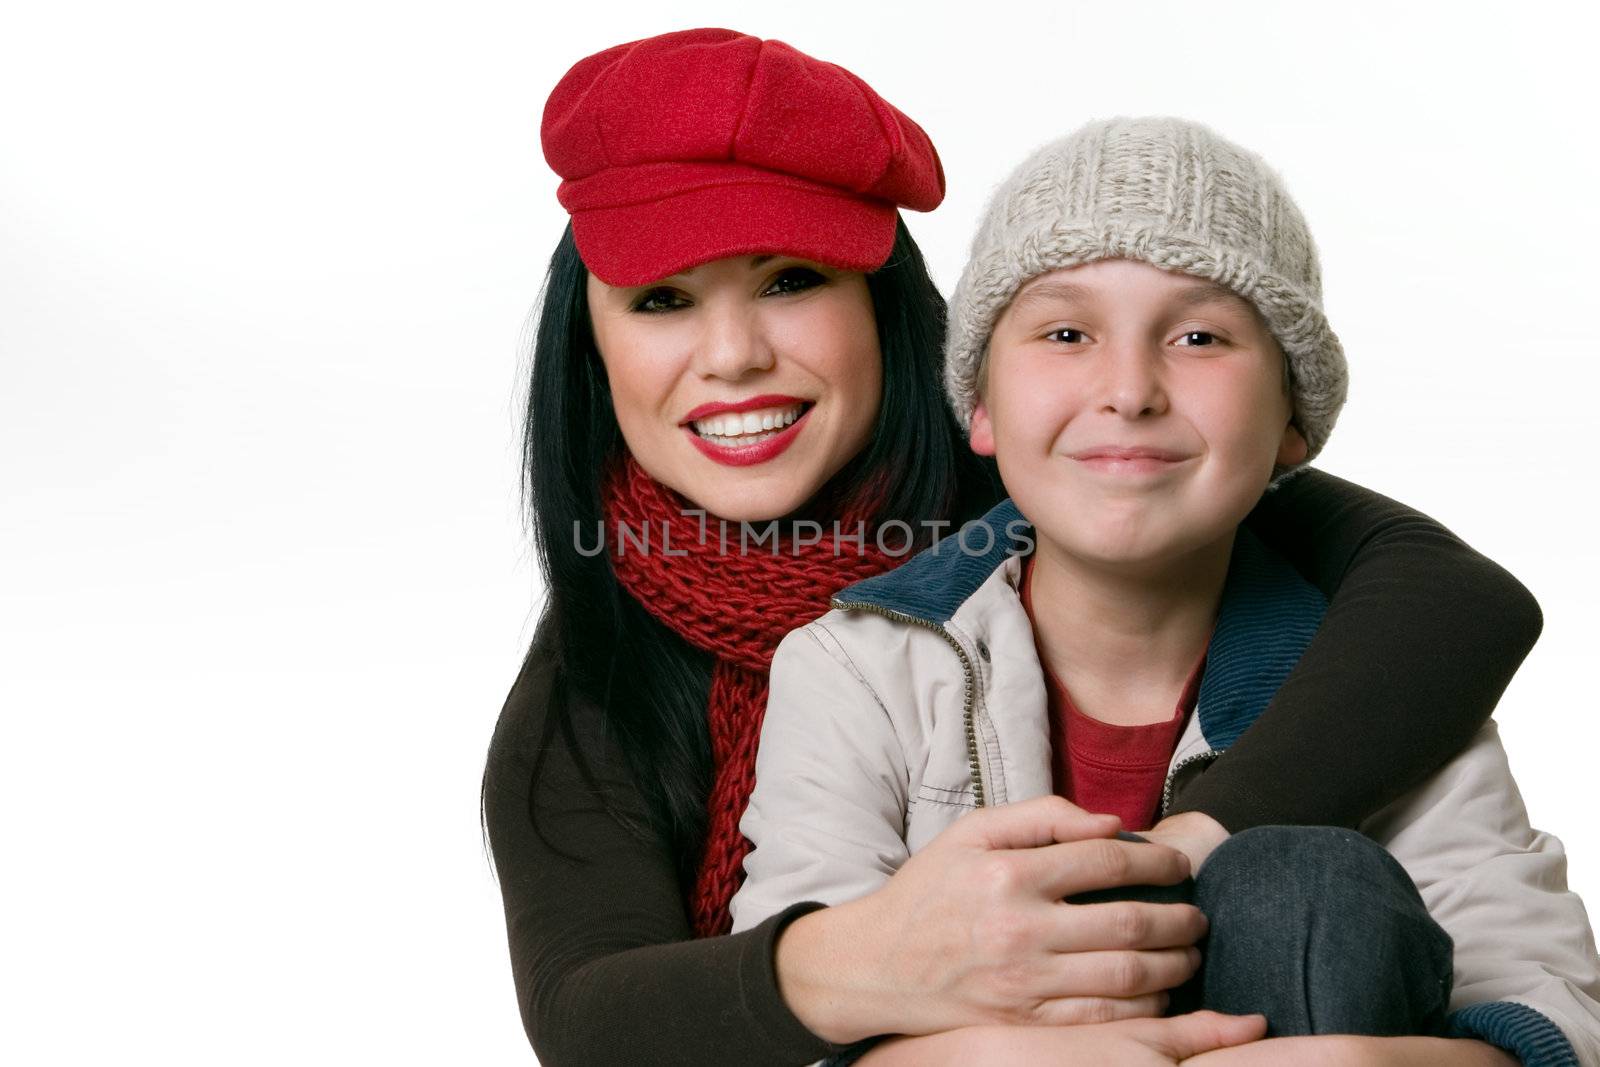 Child and mother casually dressed and smiling.